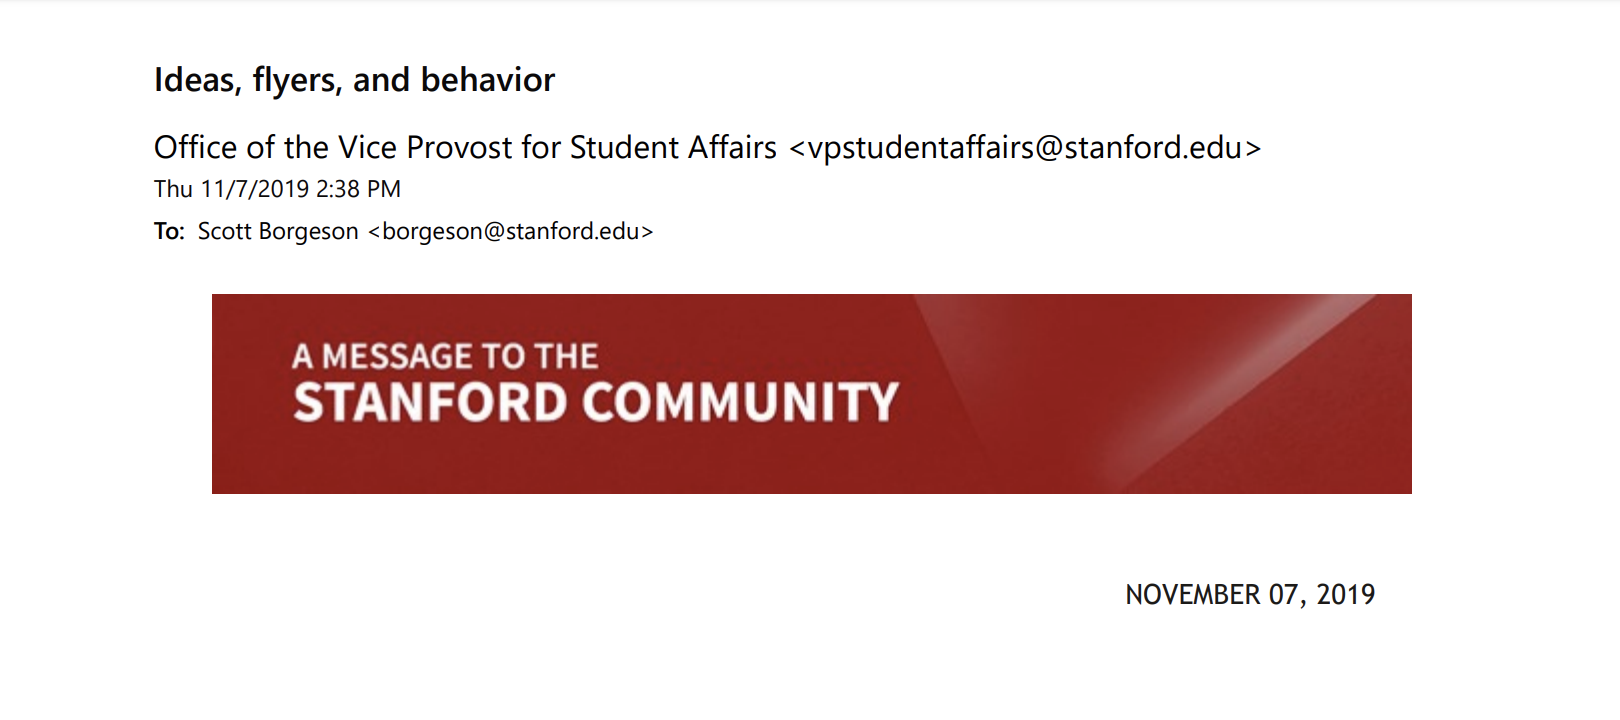 “Respected and Safe”: An Open Letter to Provost Drell - Stanford Review